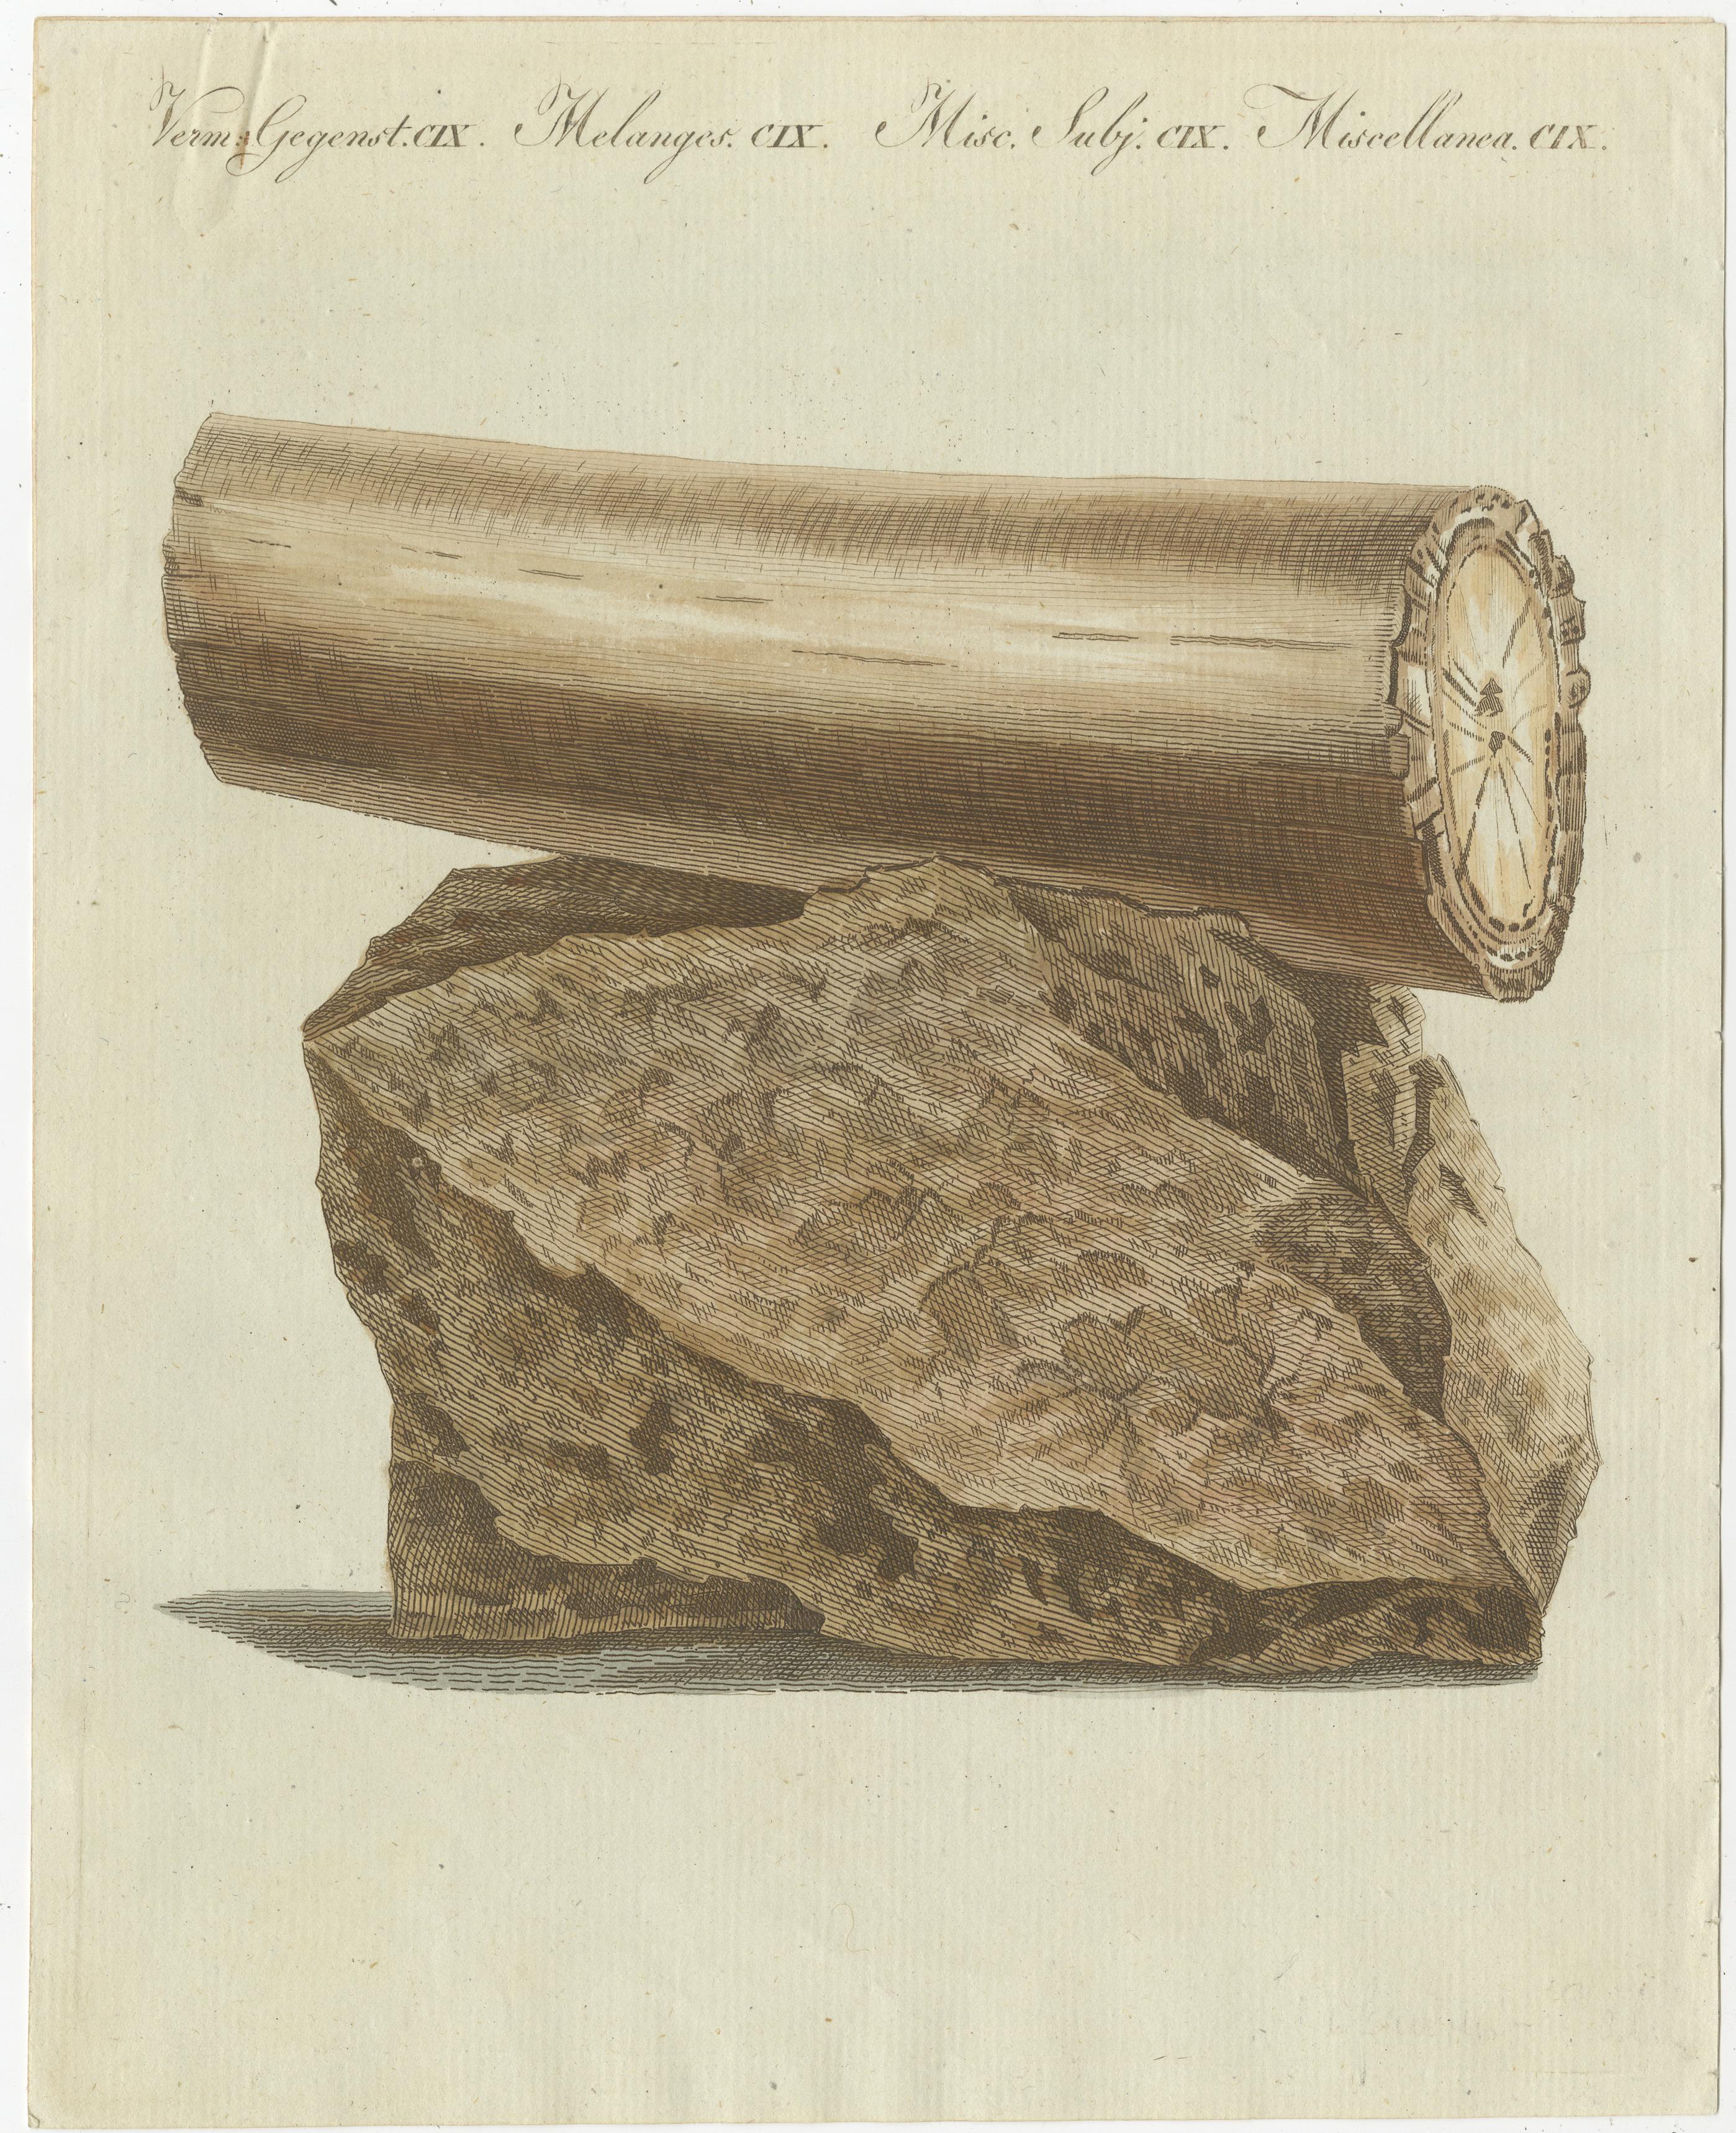 Antique print of part of an excavated elephant's tusk. This print originates from 'Bilderbuch fur Kinder' by F.J. Bertuch. Friedrich Johann Bertuch (1747-1822) was a German publisher and man of arts most famous for his 12-volume encyclopedia for